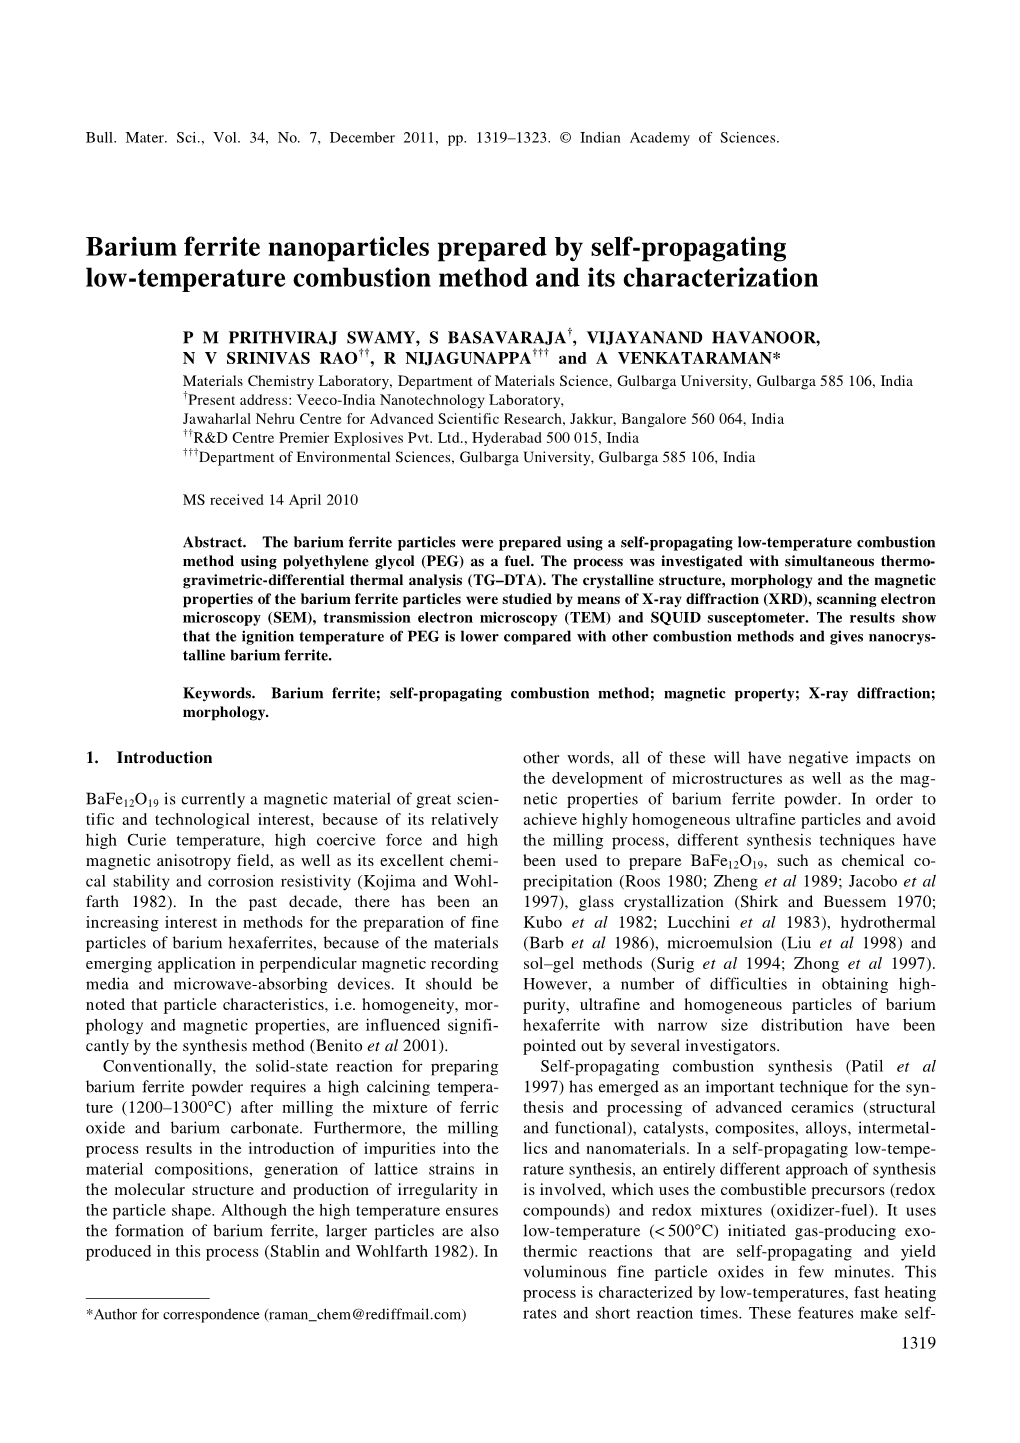 Barium Ferrite Nanoparticles Prepared by Self-Propagating Low-Temperature Combustion Method and Its Characterization